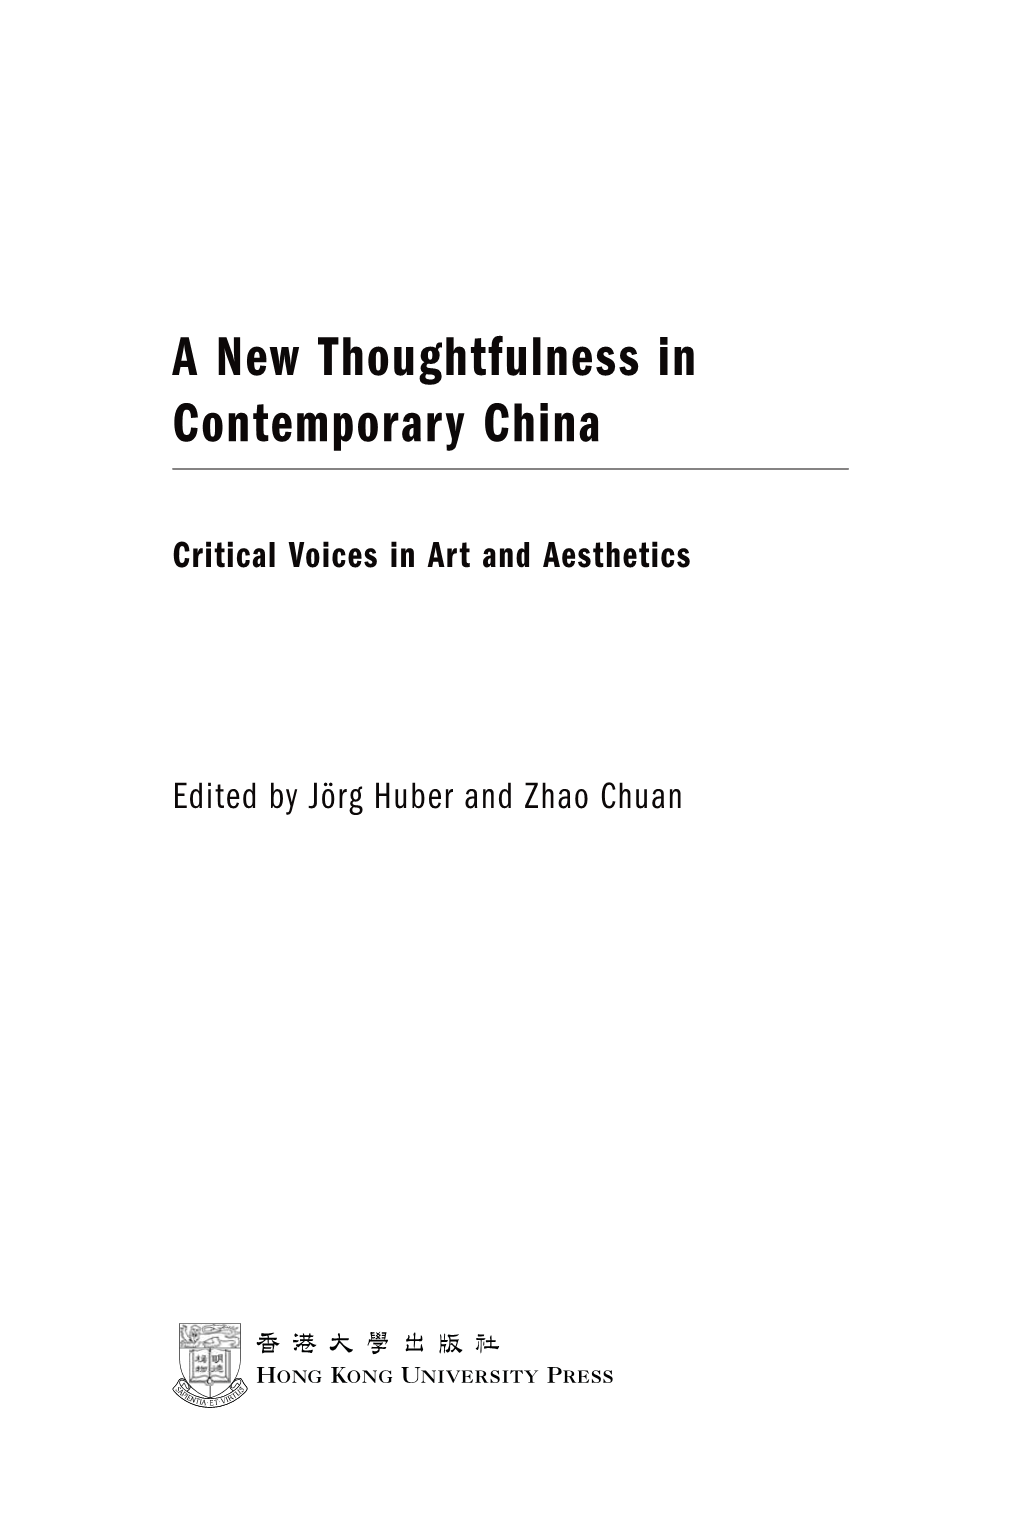 A New Thoughtfulness in Contemporary China